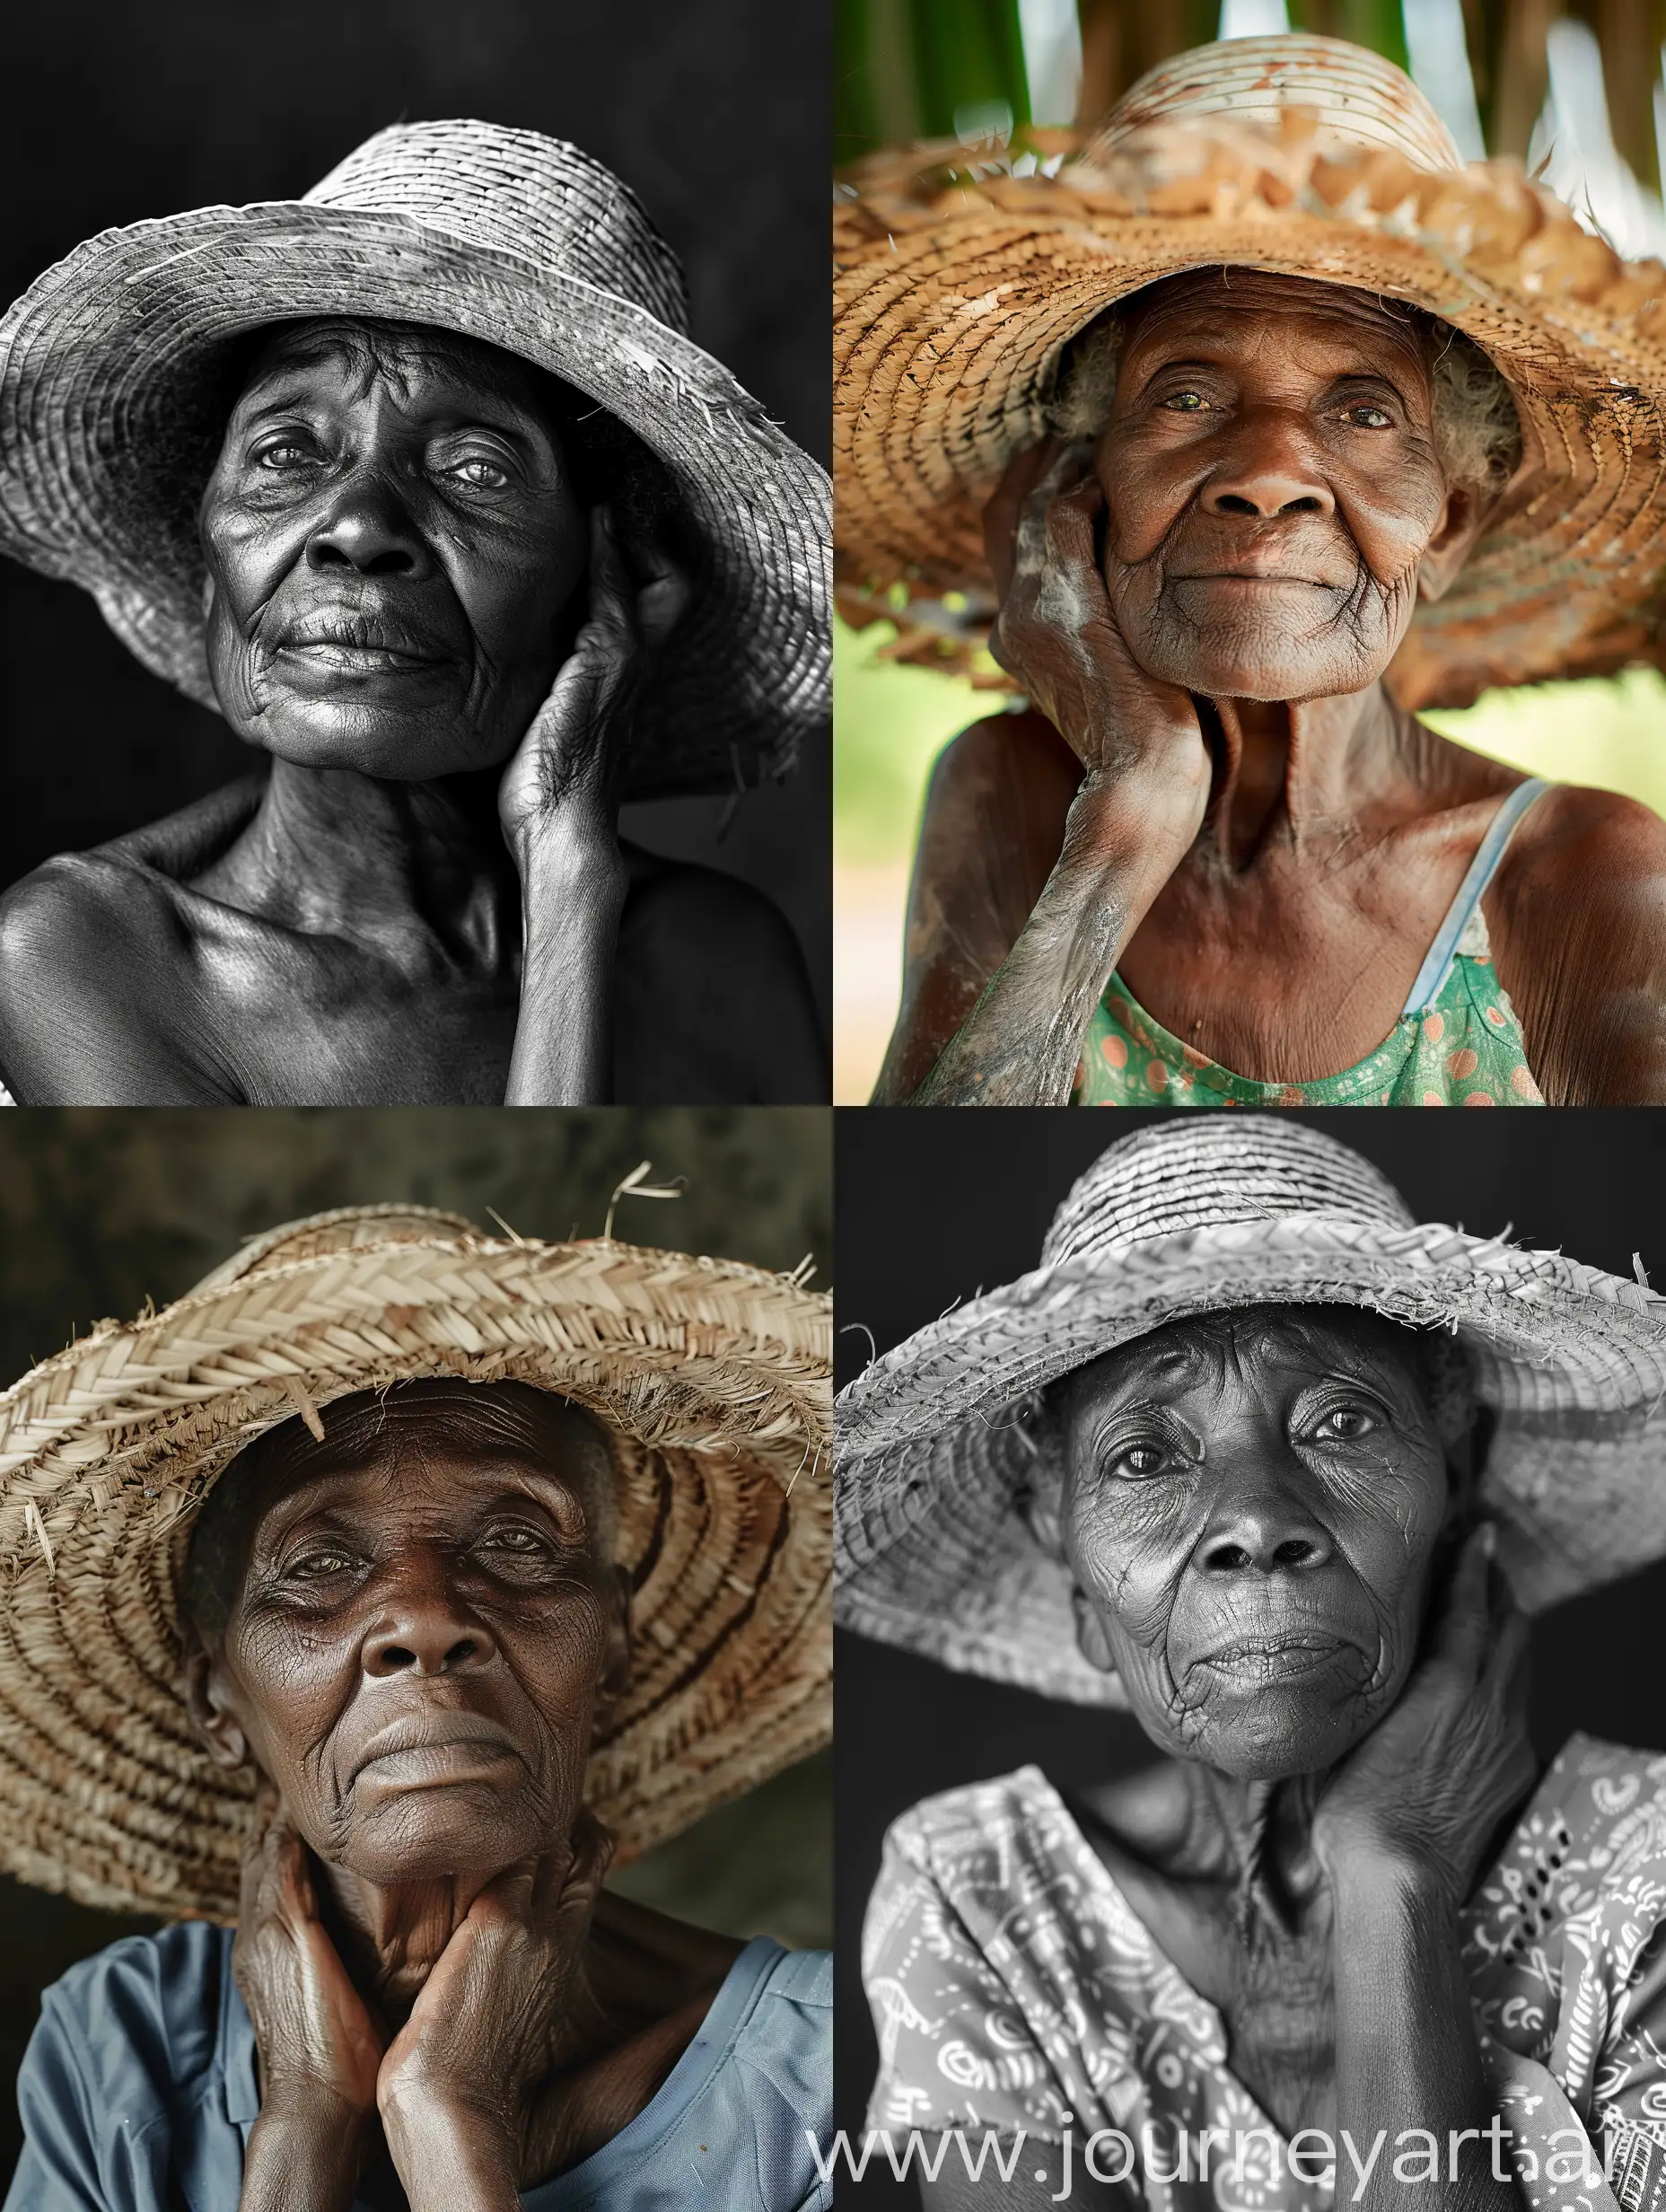 Old African woman wearing an old straw hat. She is holding her neck